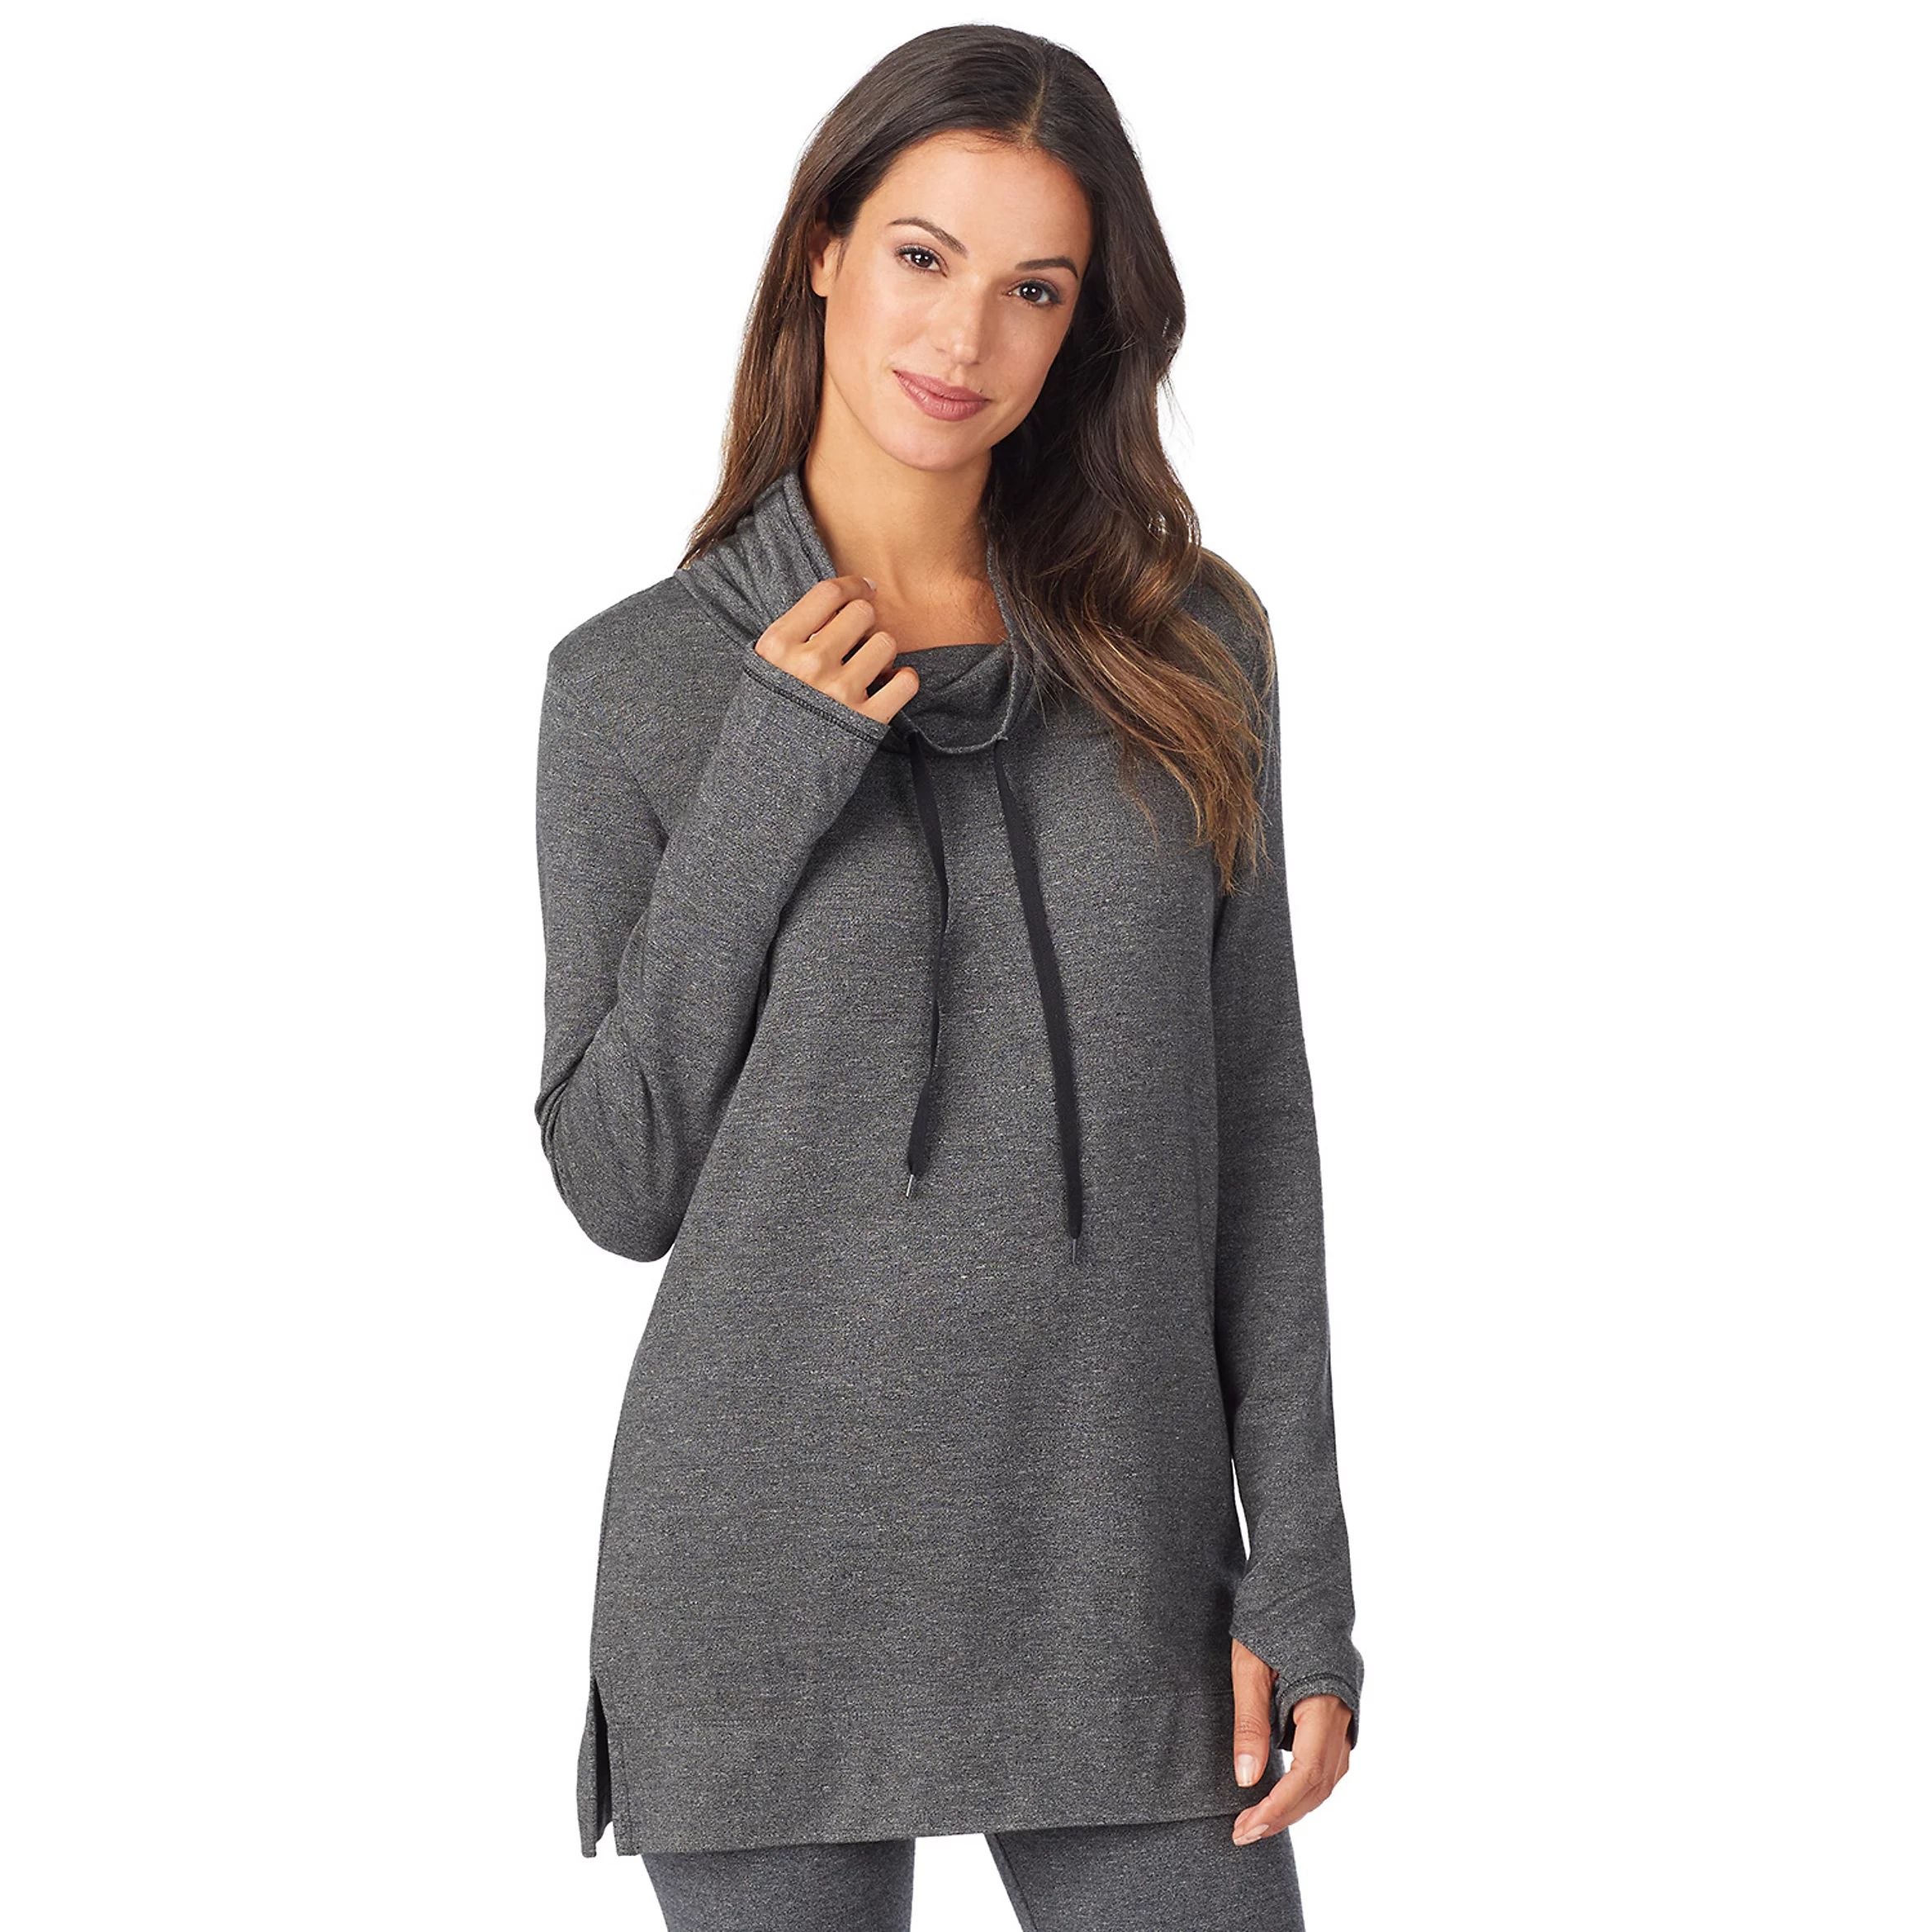 ColorColor Charcoal Heather ,double tap to change colorCharcoal Heather2 colors available | Kohl's